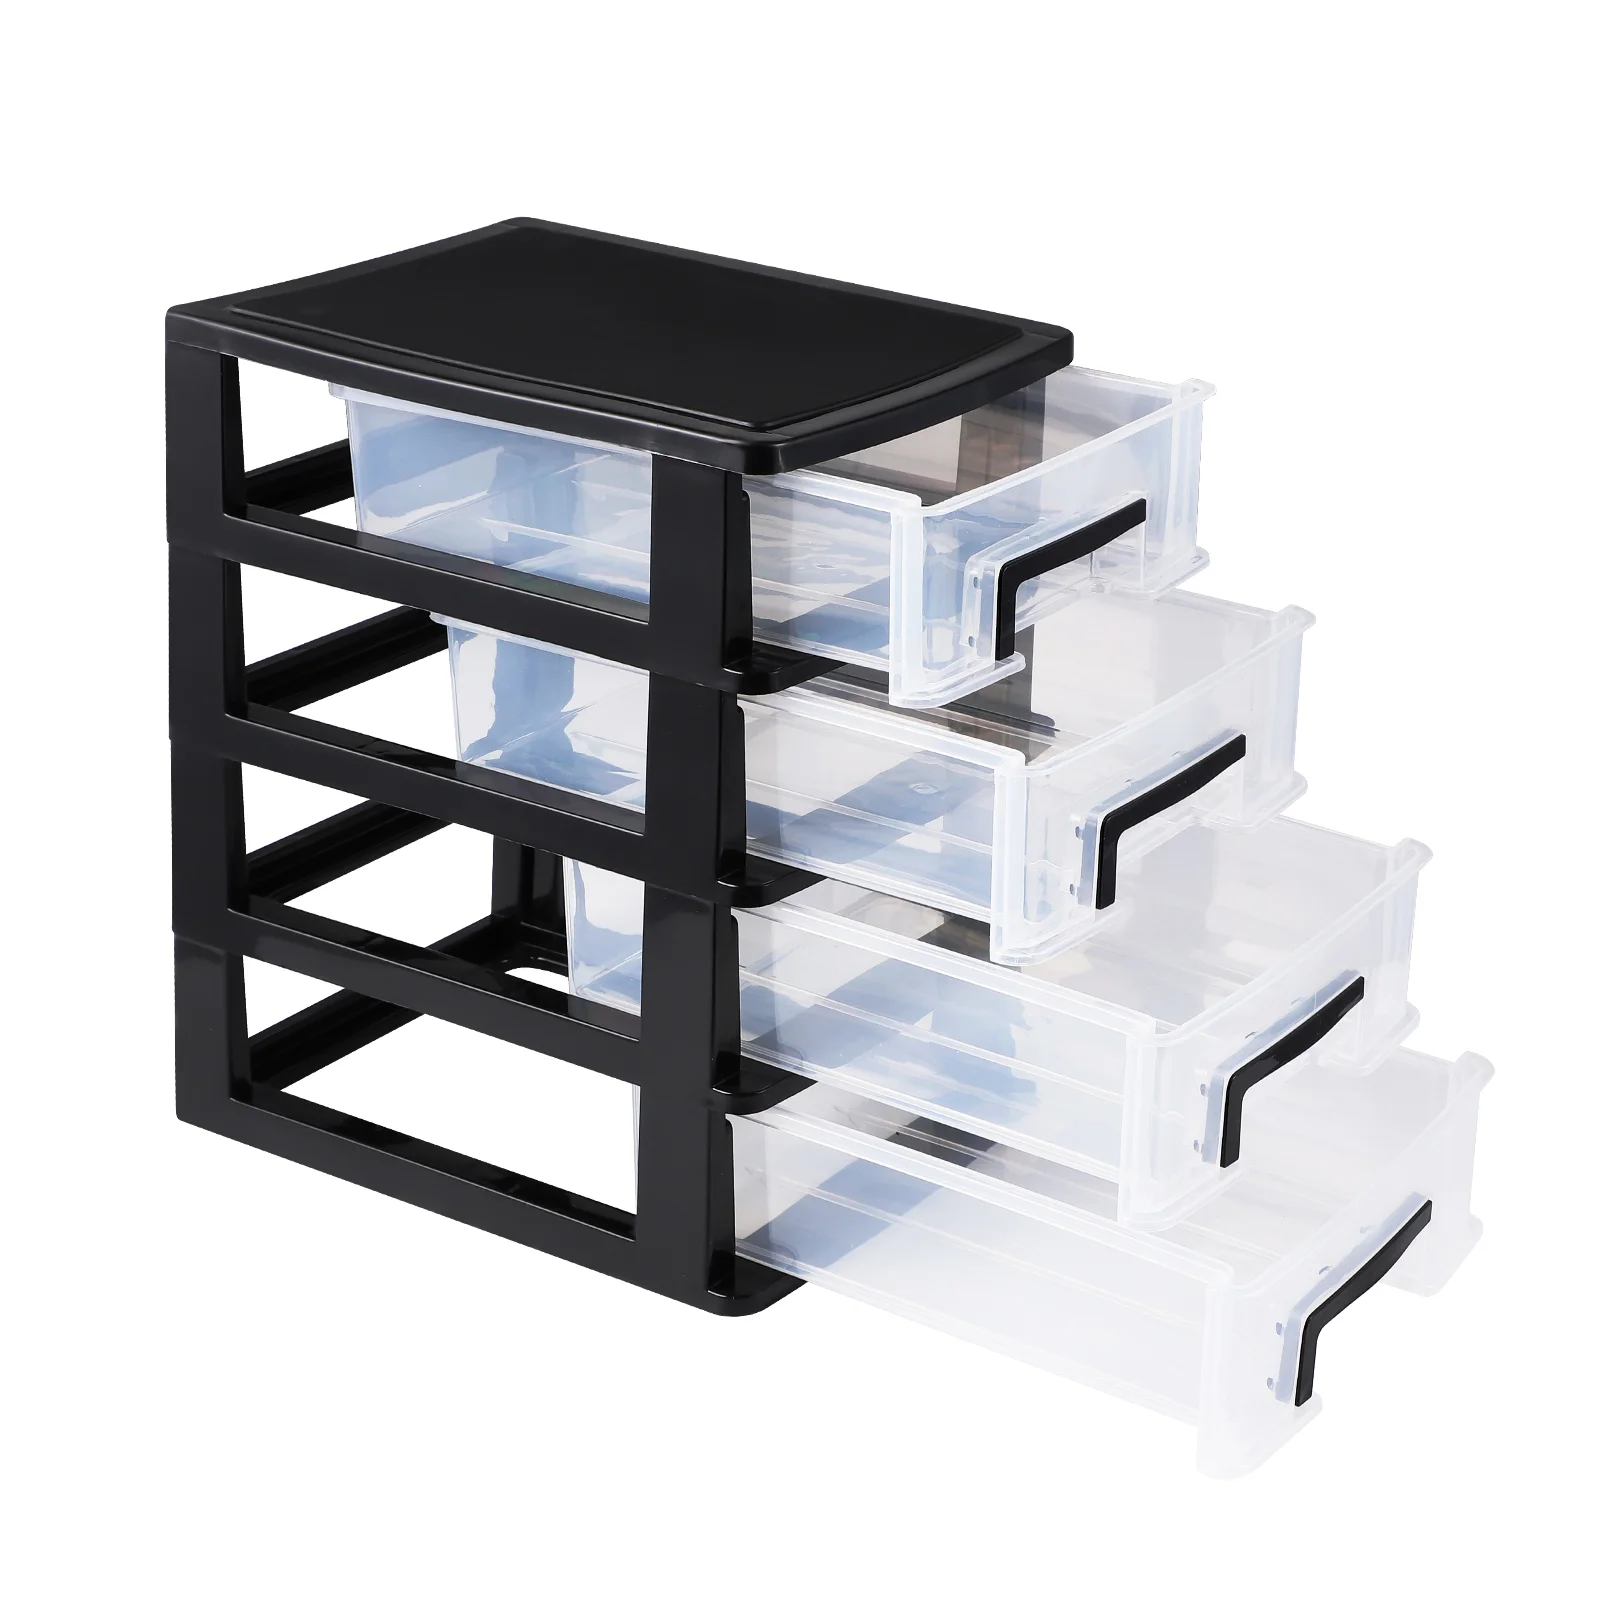 

Organizer Drawer Storage Desktop Desk Drawers Organizers Craft Box Office Plastic Room Containers Dorm Tier Makeup Type Clear